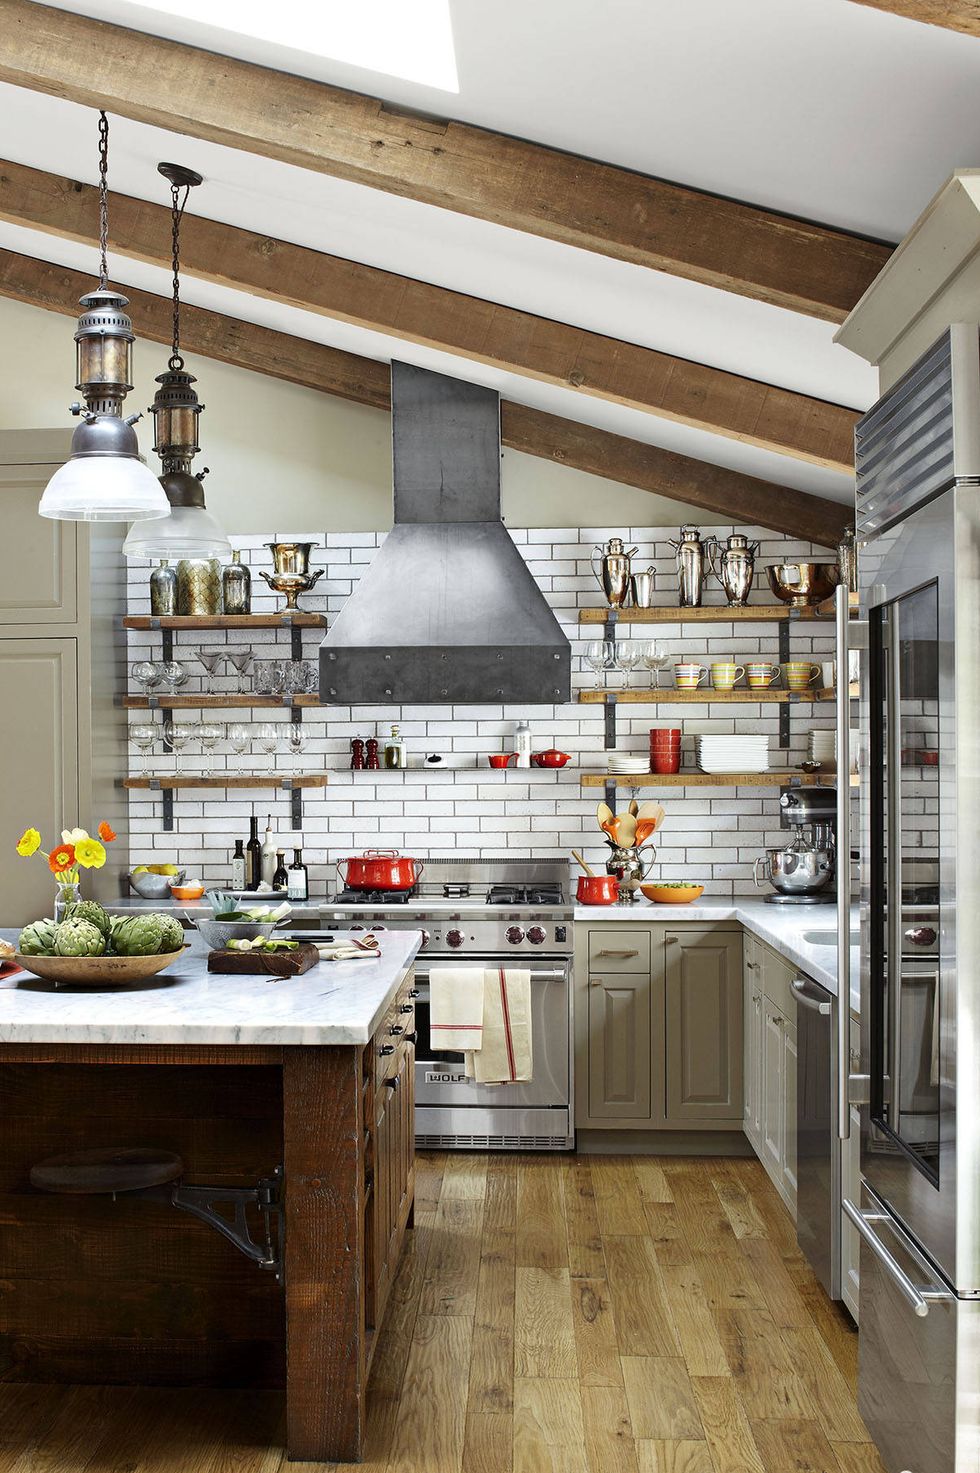 22 Best Open Kitchen Shelving Ideas and Decor